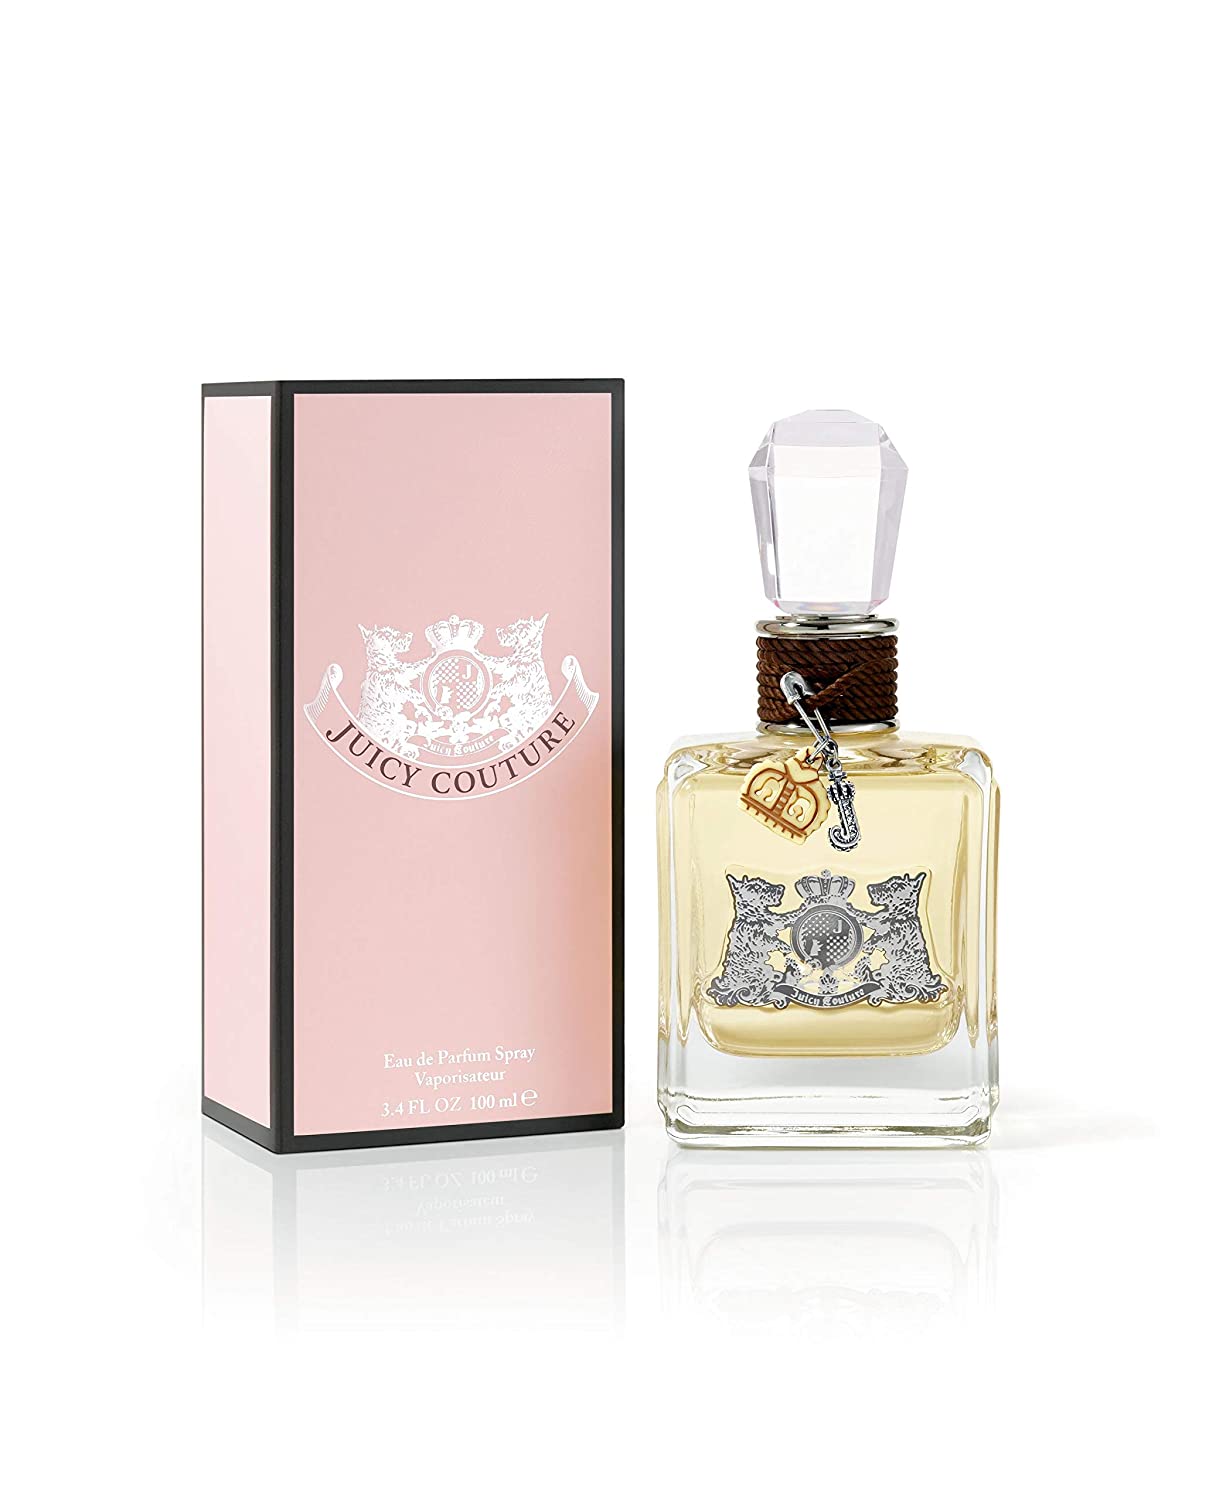 JUICY COUTURE EDP 100 ML